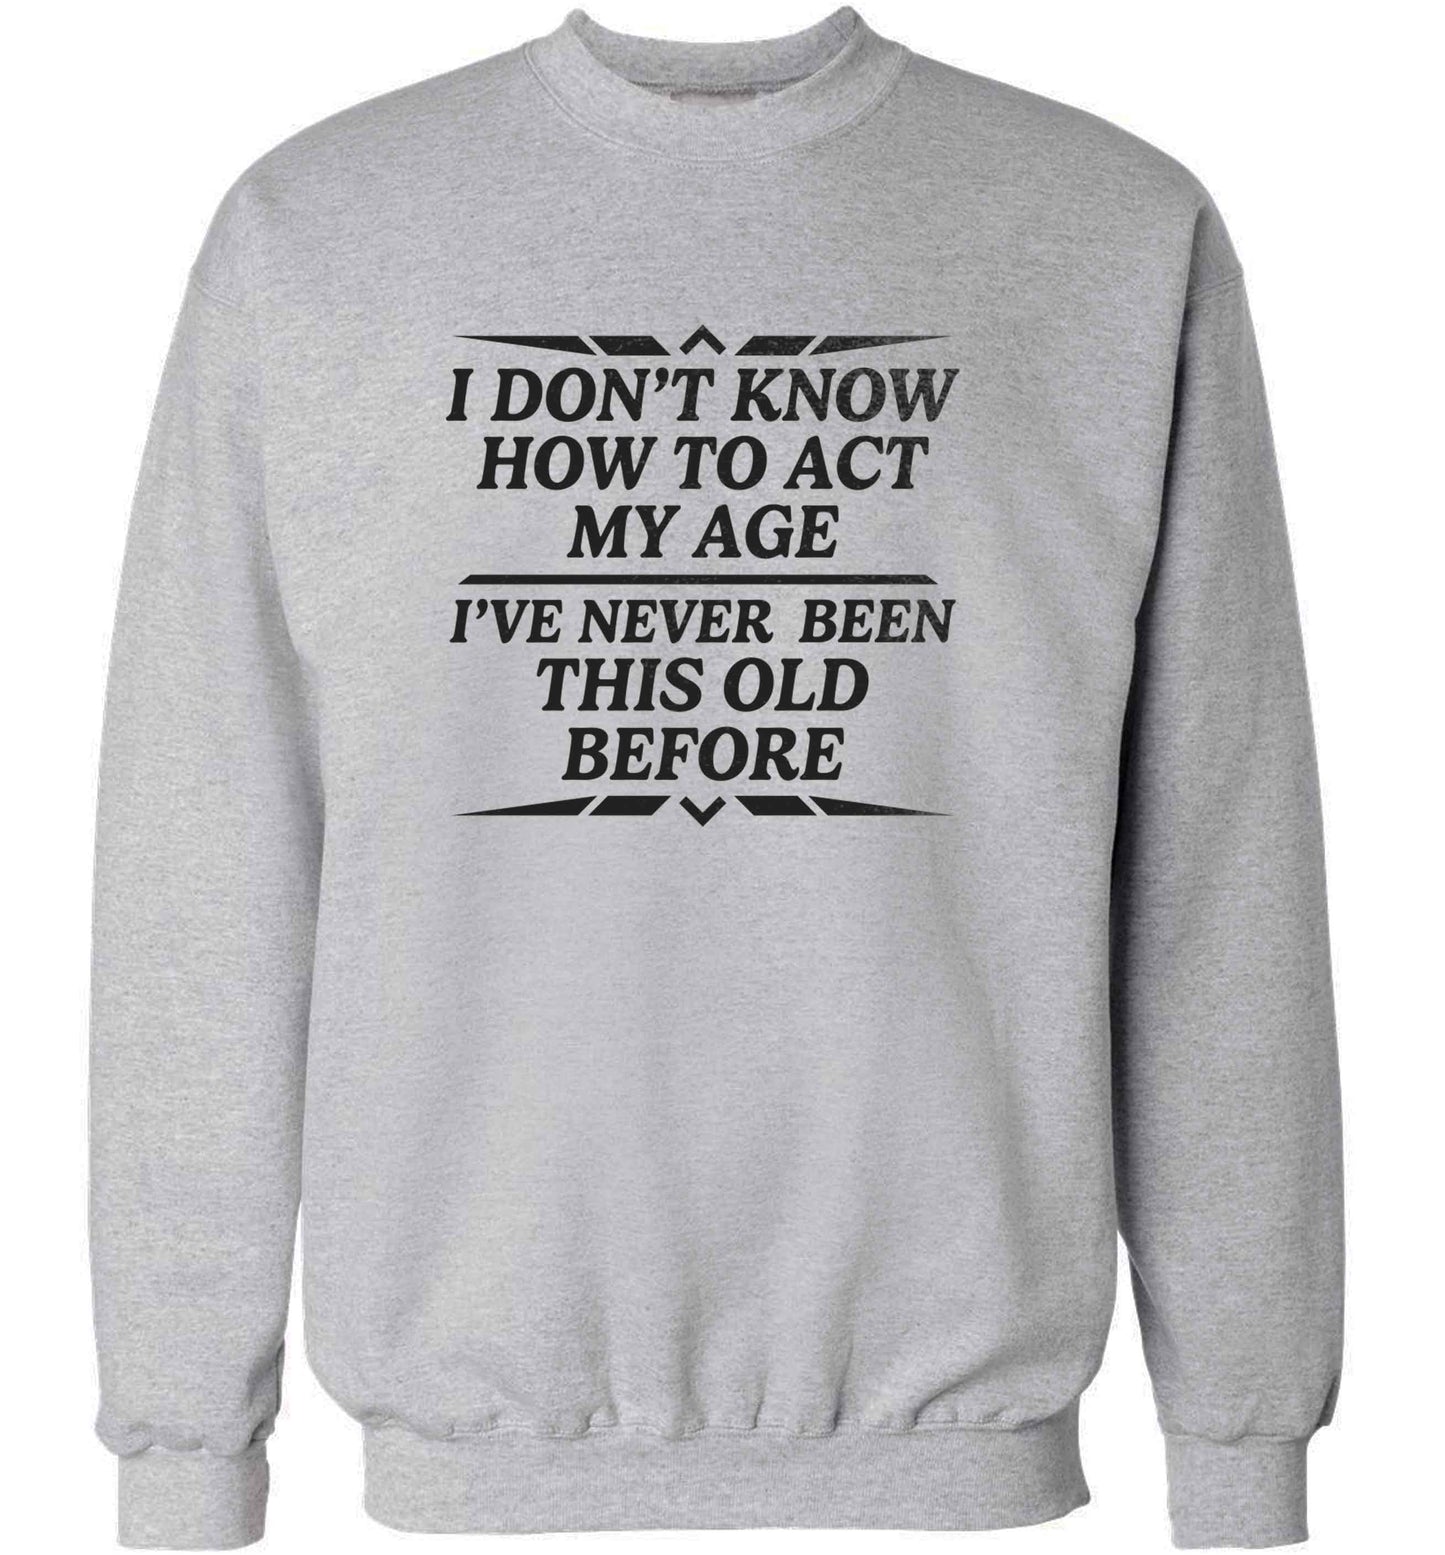 I don't know how to act my age I've never been this old before adult's unisex grey sweater 2XL